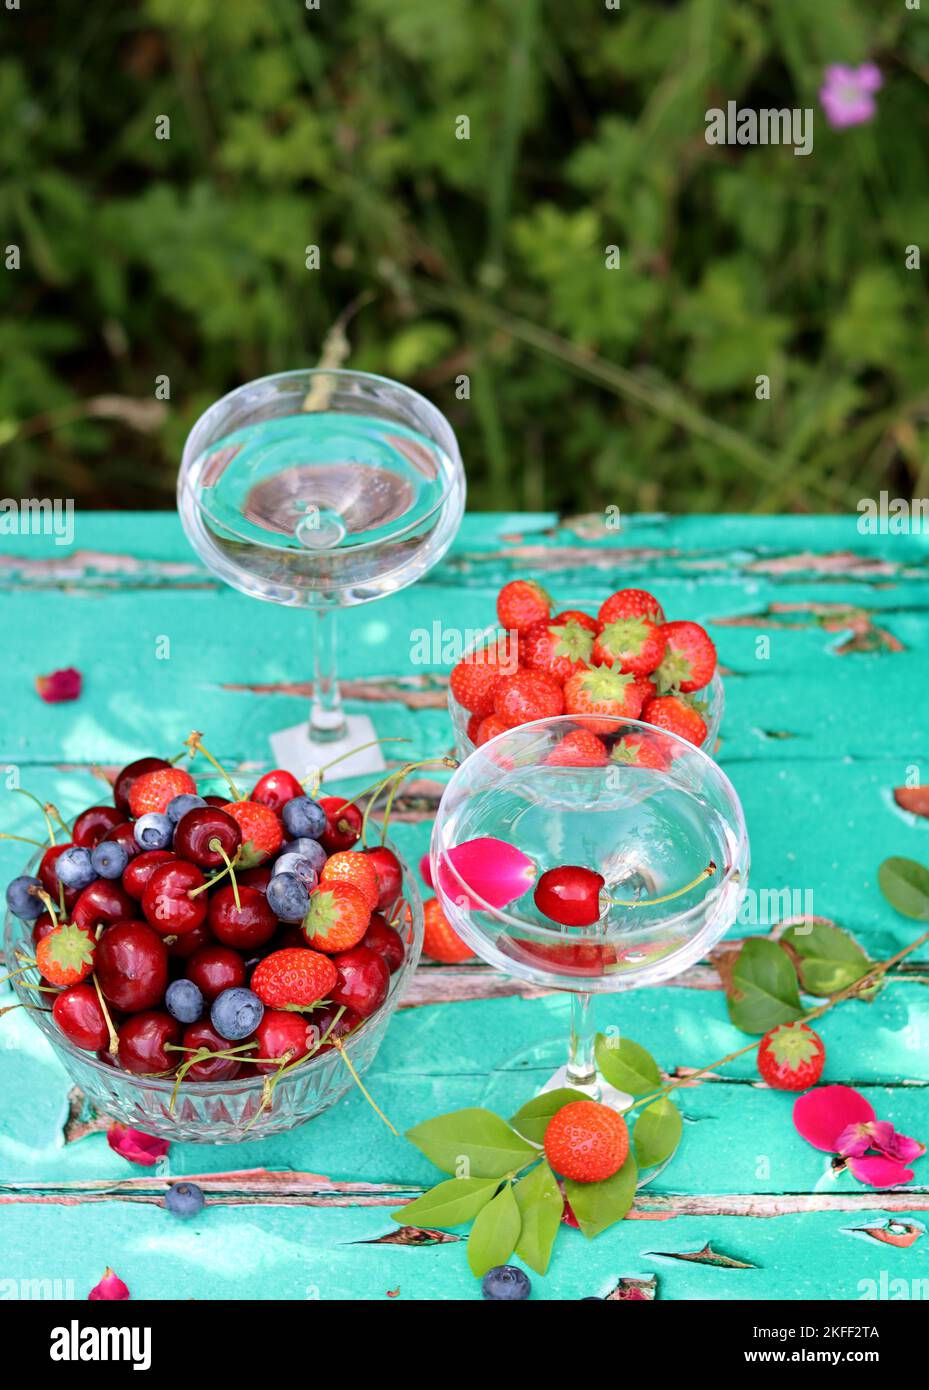 Simple composition still life photo with fresh berries. Seasonal fruit close up photo. Eating healthy concept. Stock Photo